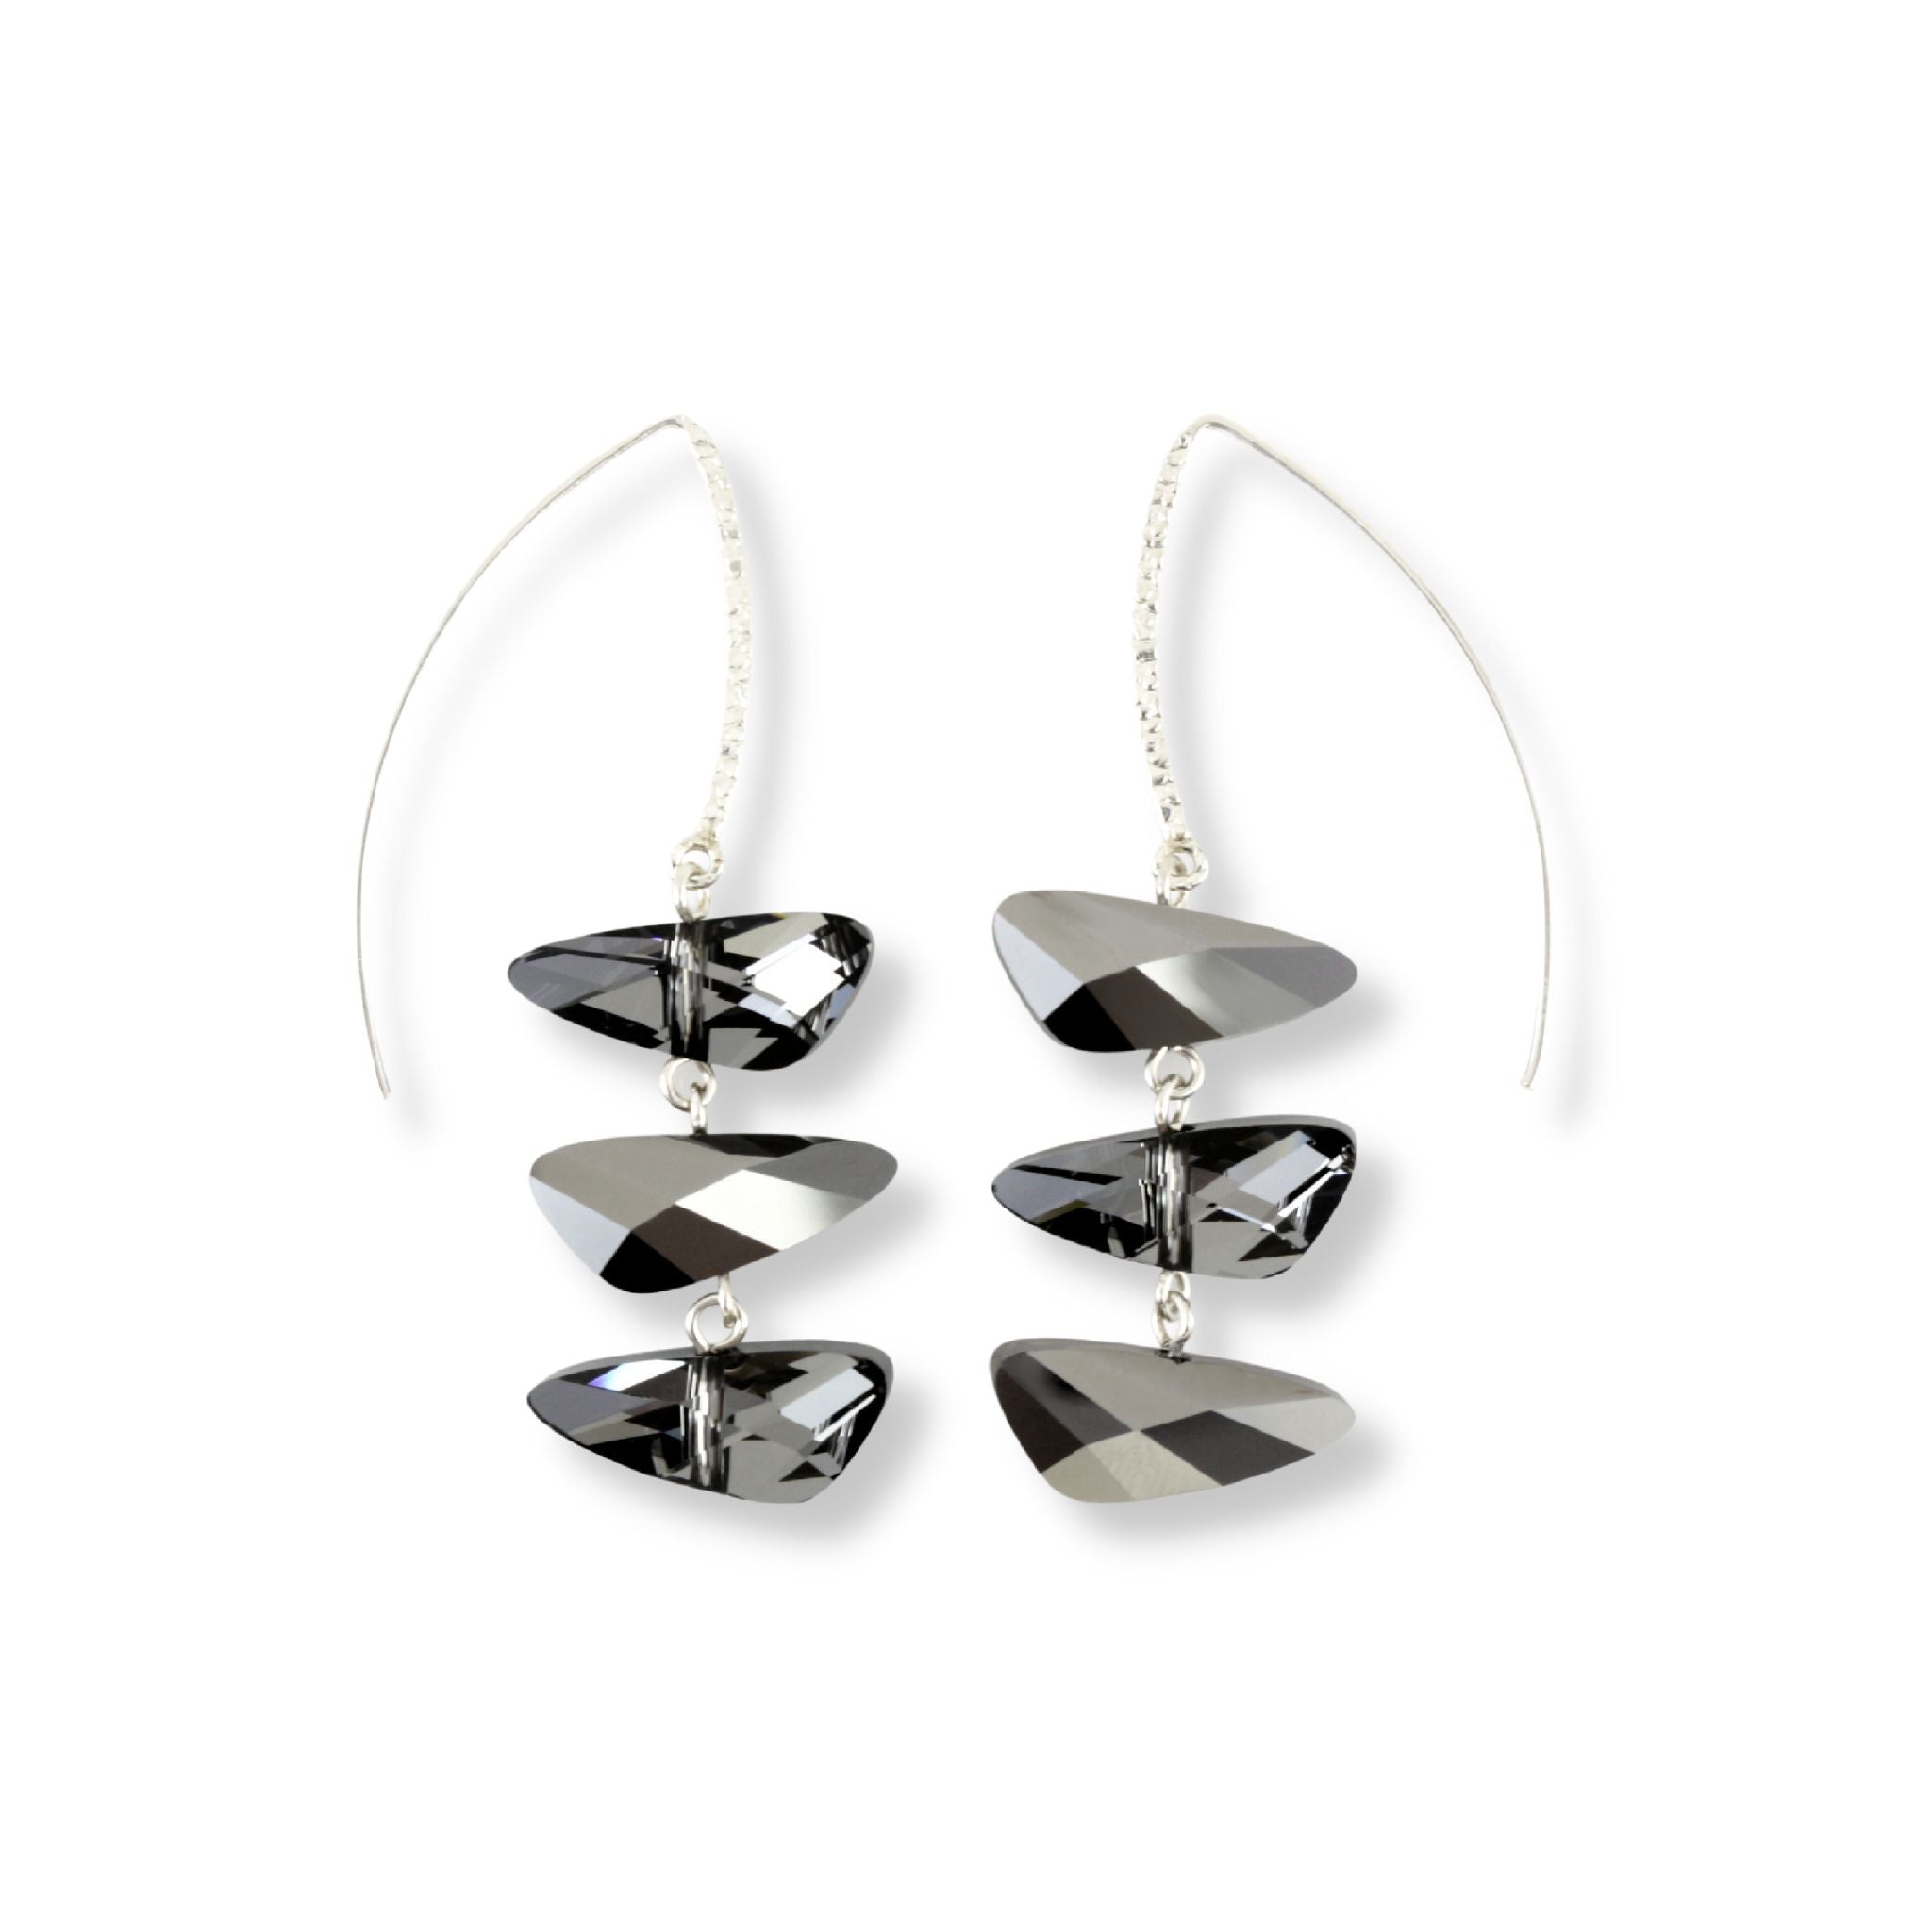 Wing shaped Swarovski crystal pendant earrings in a reflective dark grey color displayed on a long sterling silver marquise hook